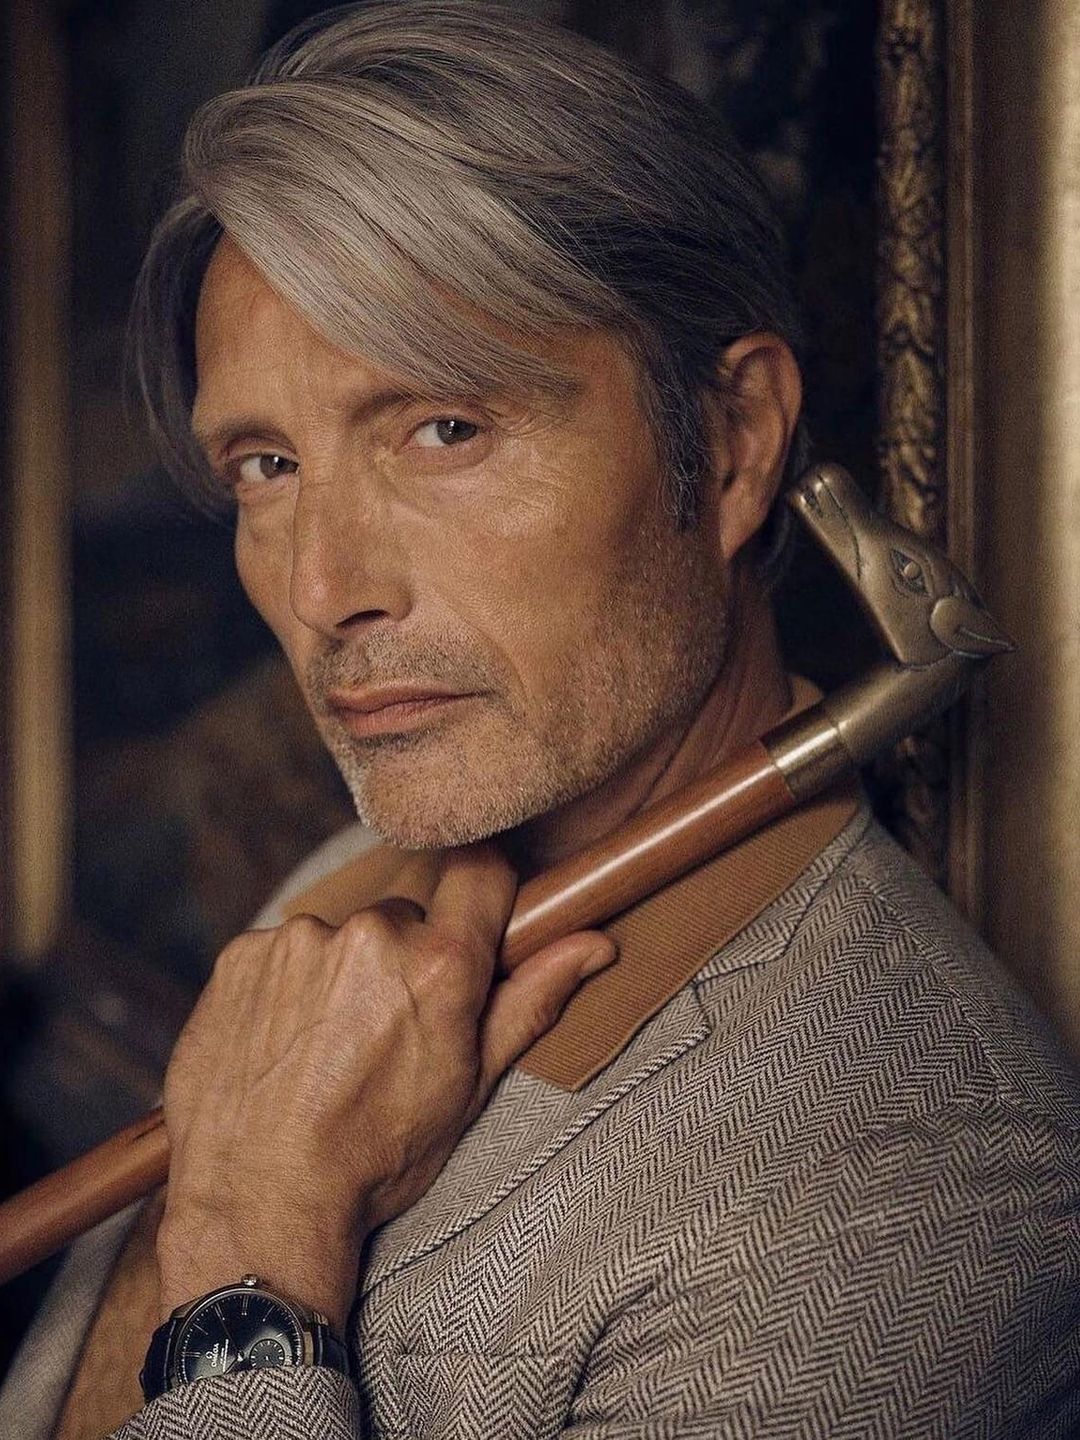 Mads Mikkelsen does he have a wife